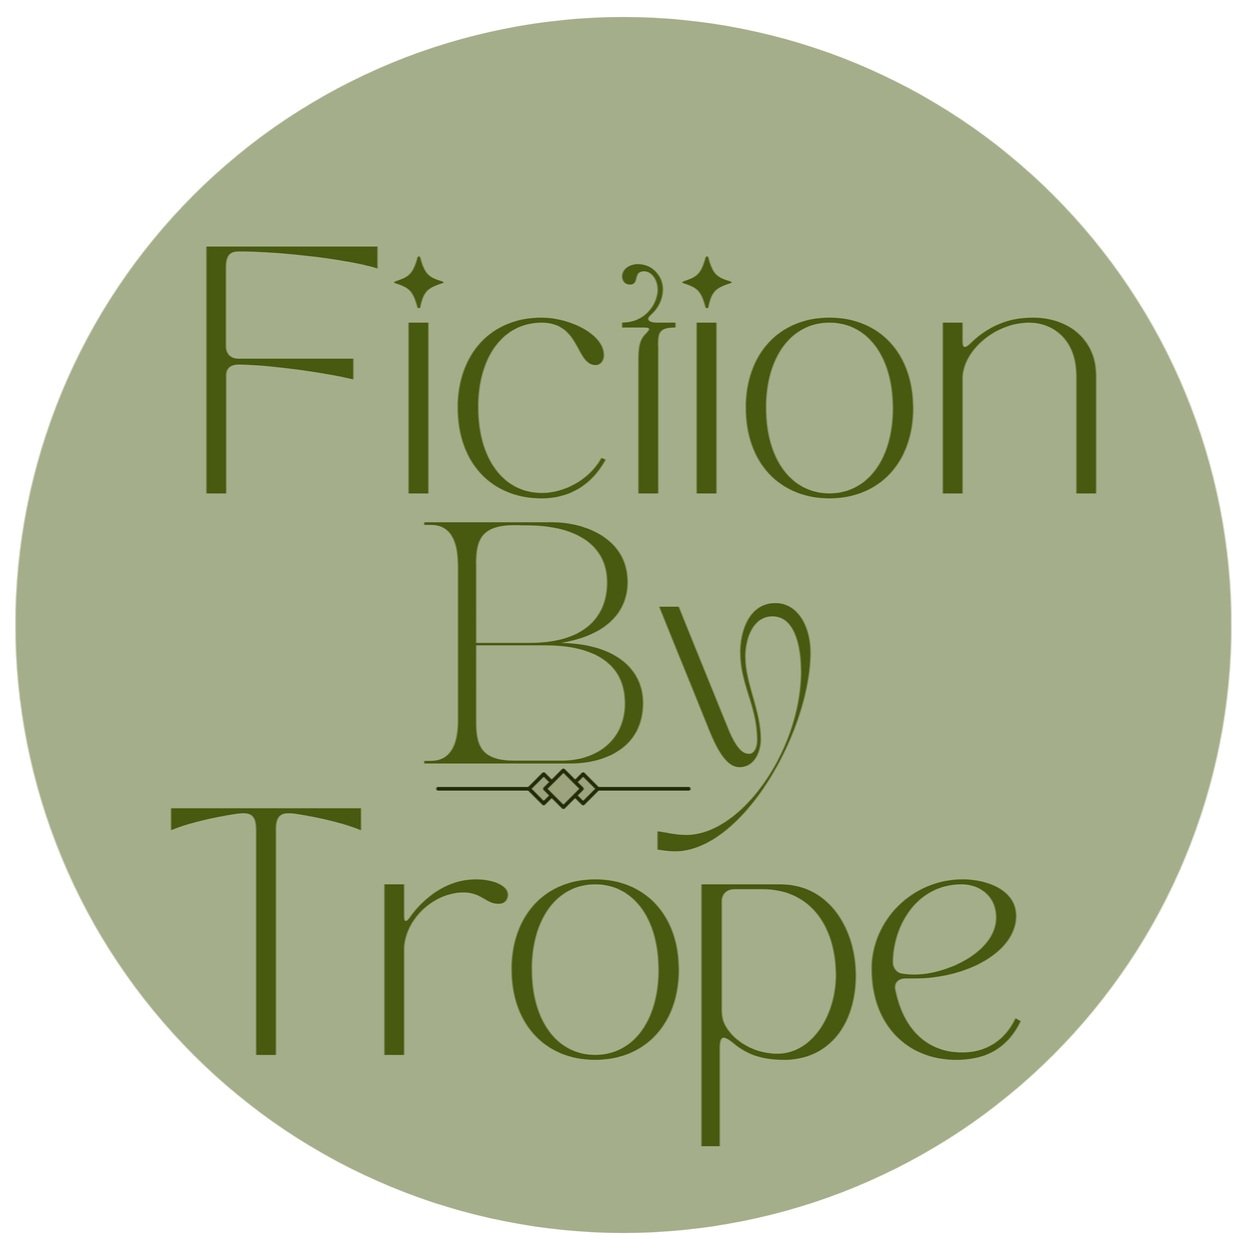 Fiction By Trope